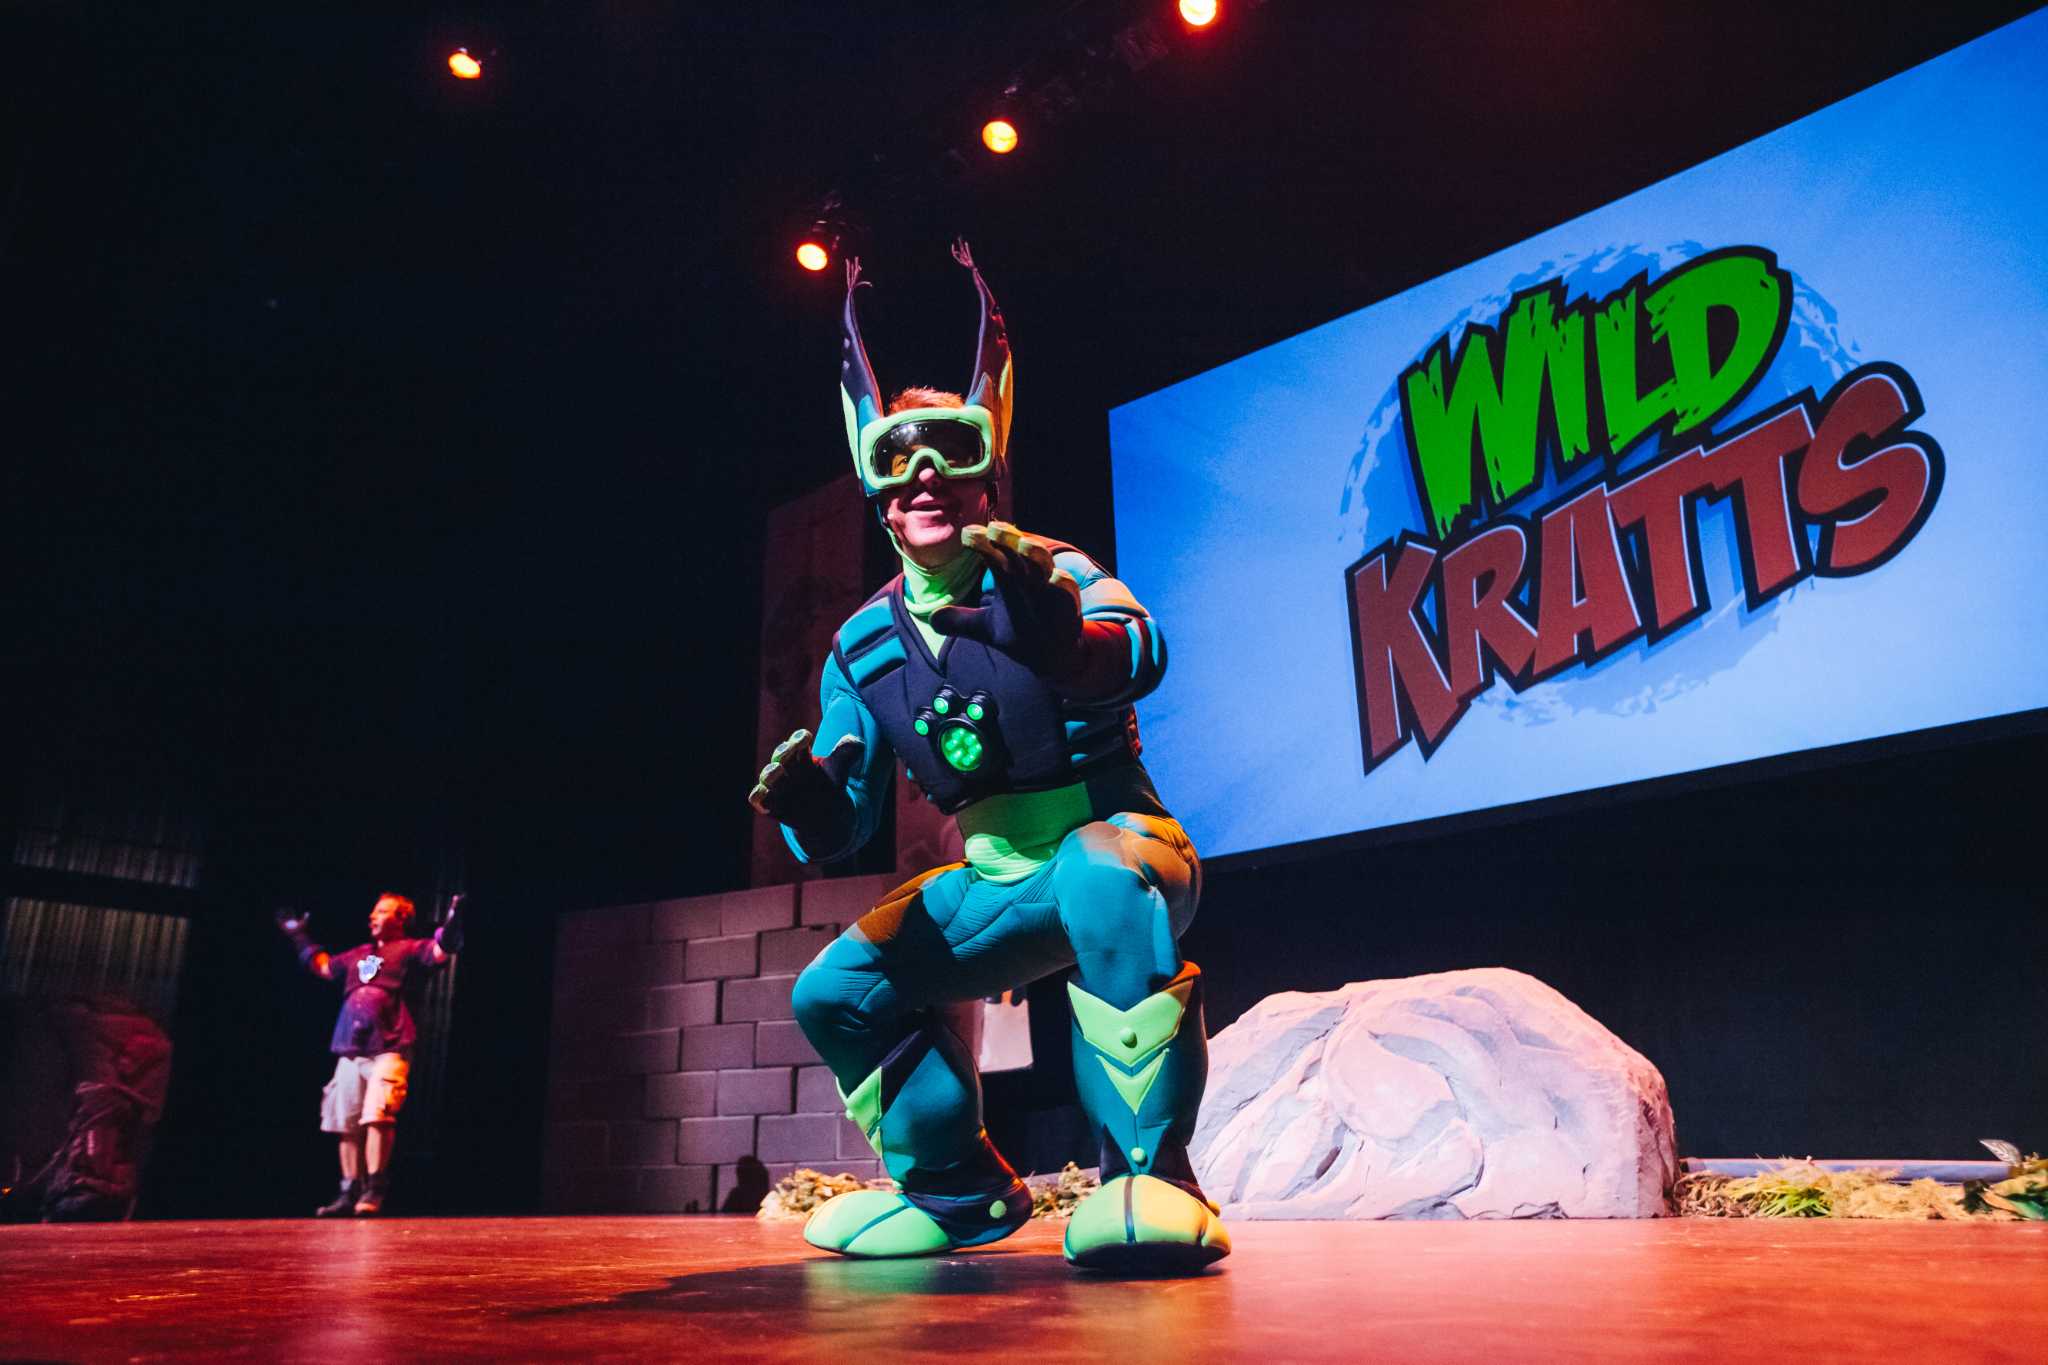 Brothers being 'Wild Kratts' bring live show to Palace